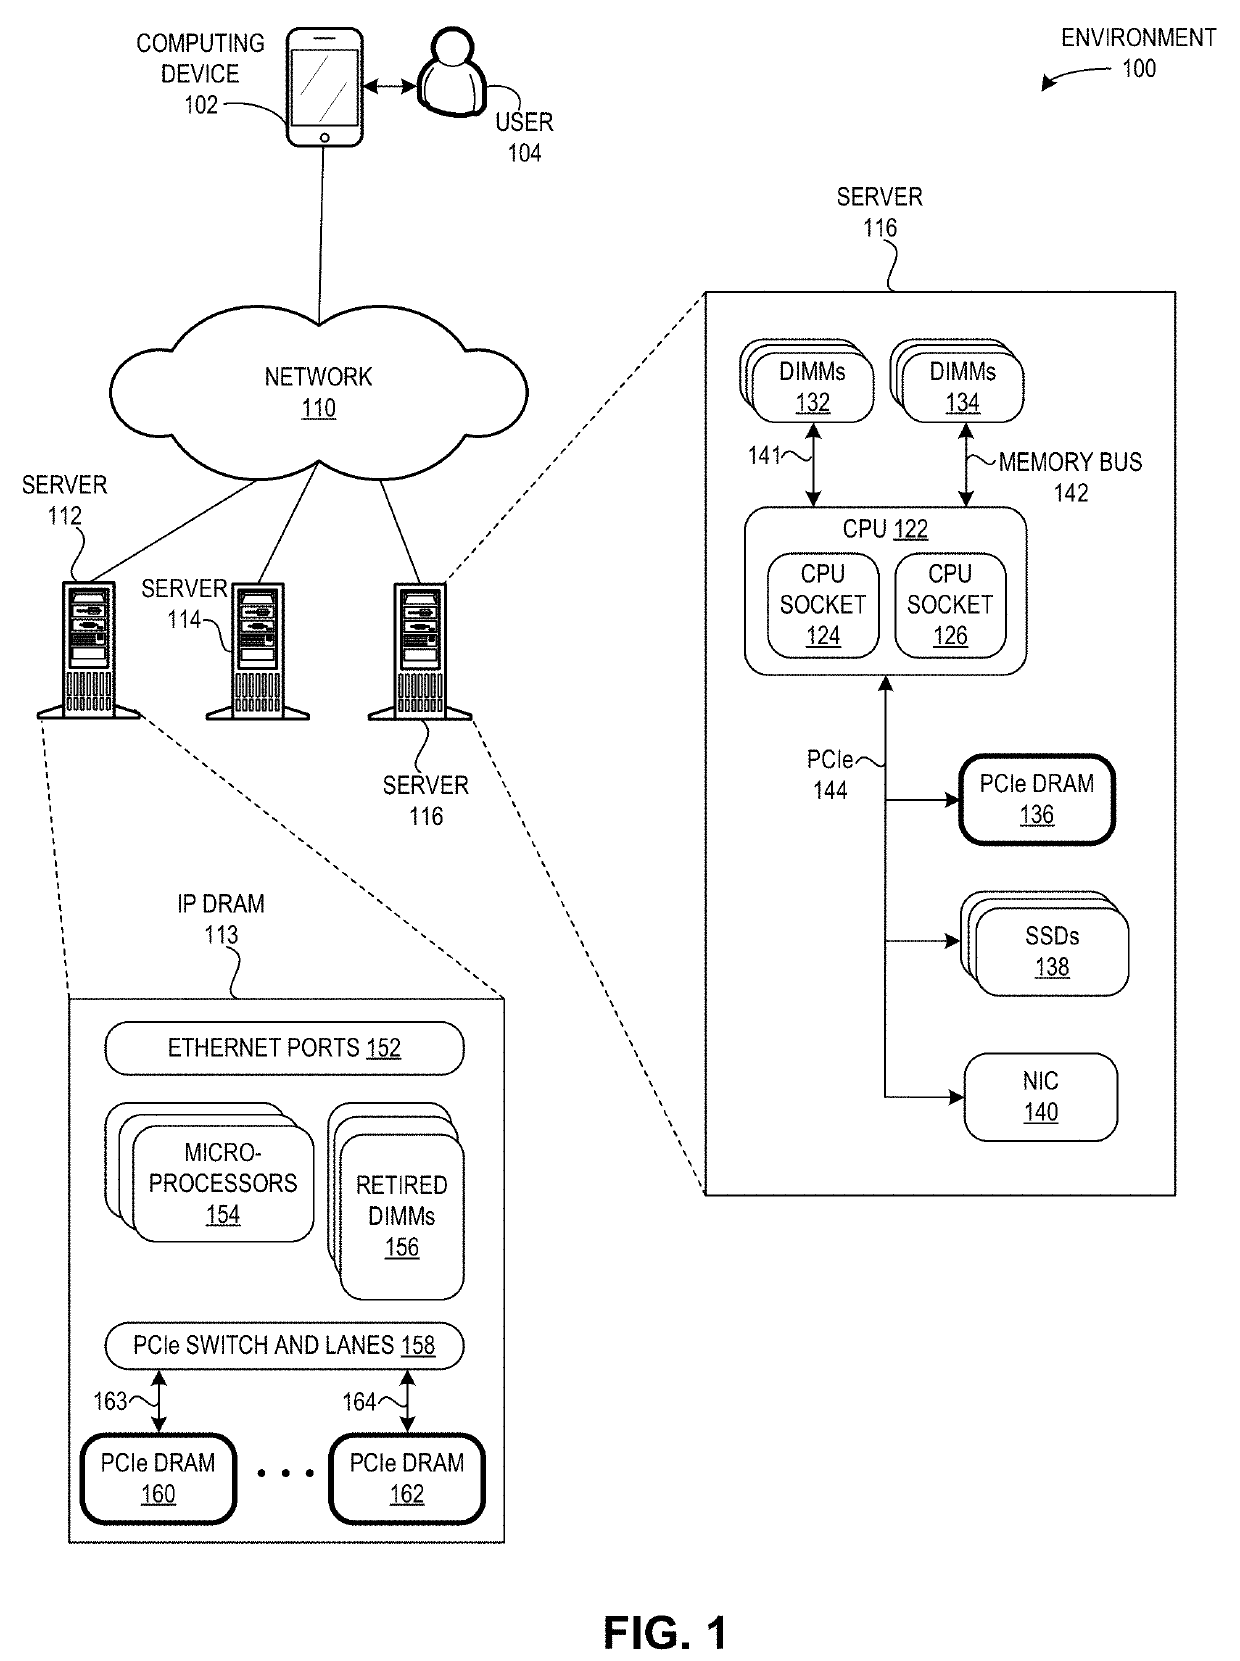 Method and system for facilitating high-capacity shared memory using dimm from retired servers